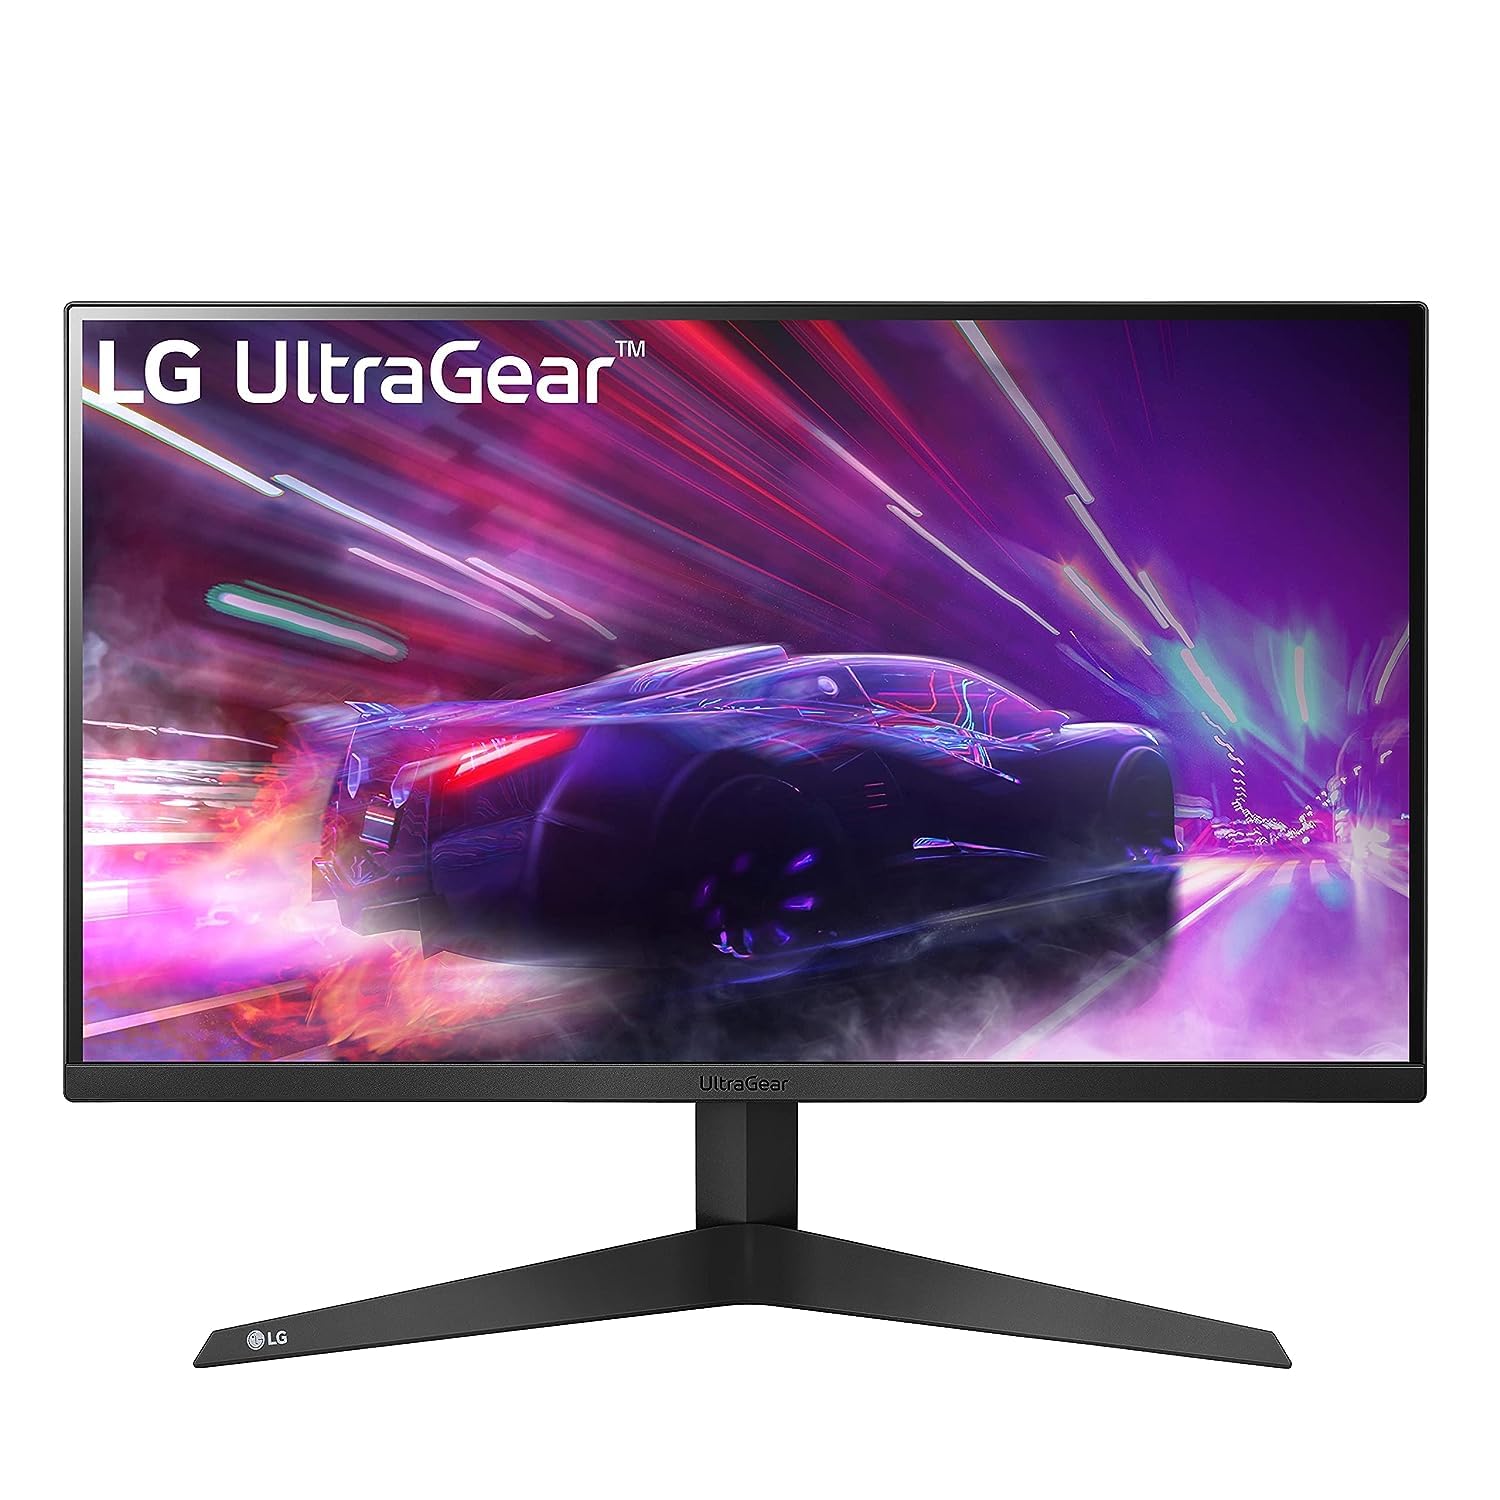 LG 24GQ50F-B 24-Inch Class Full HD (1920 x 1080) Ultragear Gaming Monitor with 165Hz Refresh Rate and 1ms MBR, AMD FreeSync Premium  Only $109